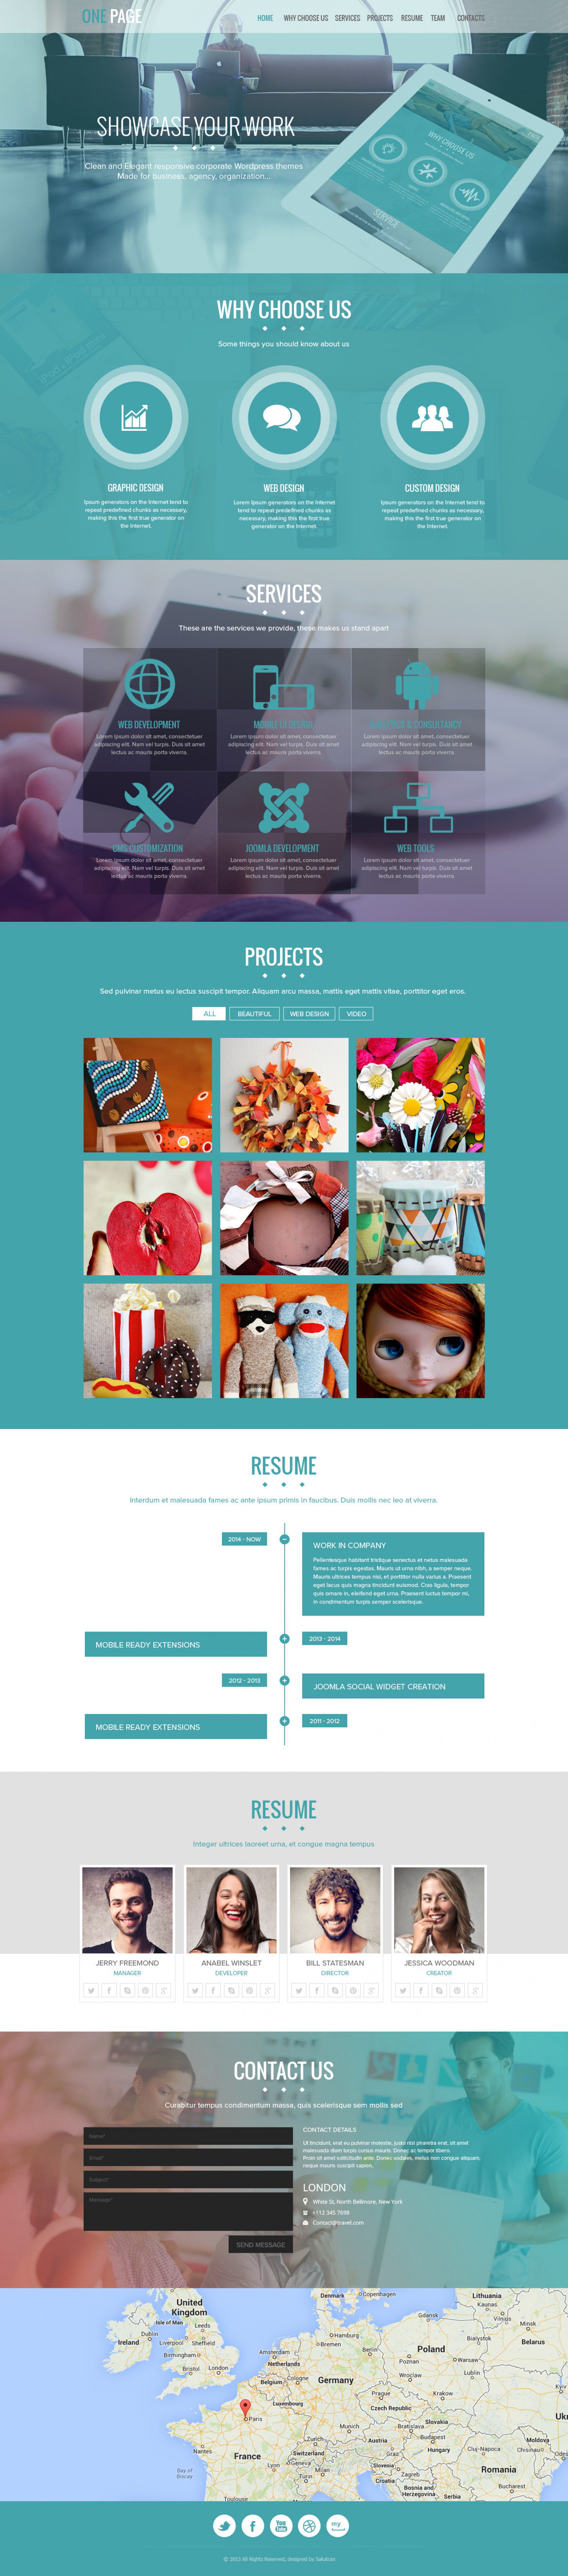 Best One Page WordPress Theme 2014 Infographic